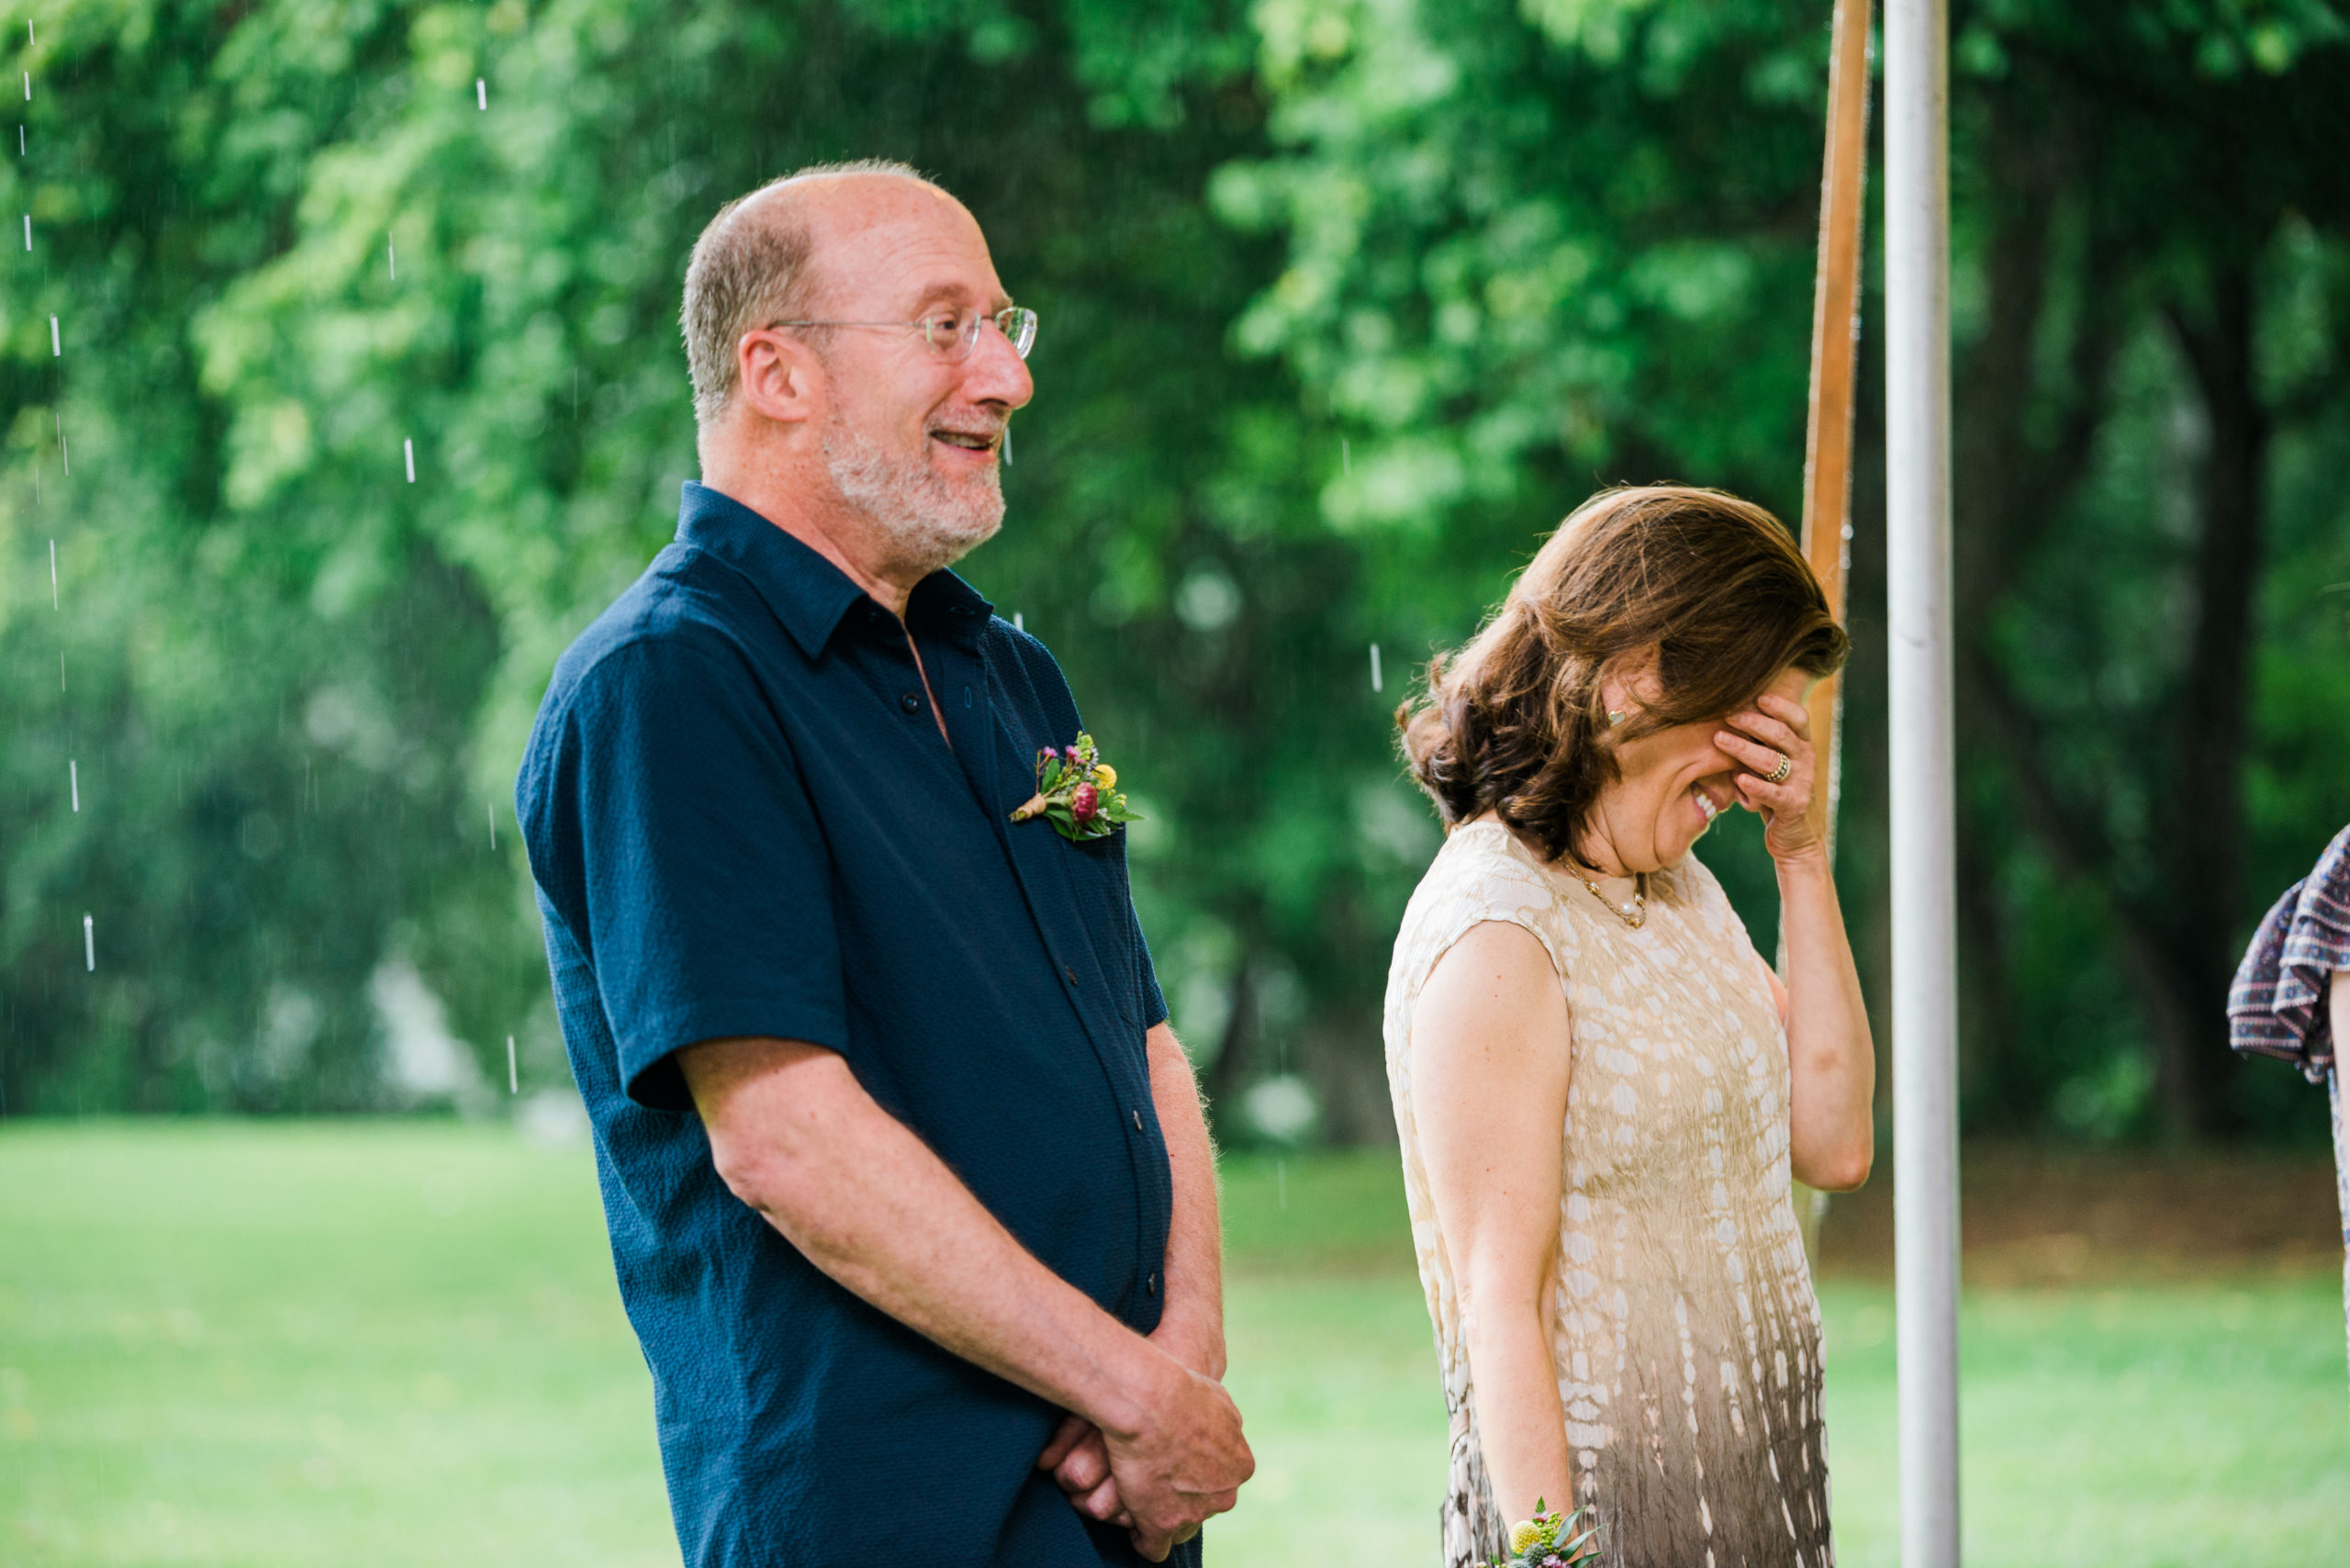 A mother and father look on at a wedding ceremony